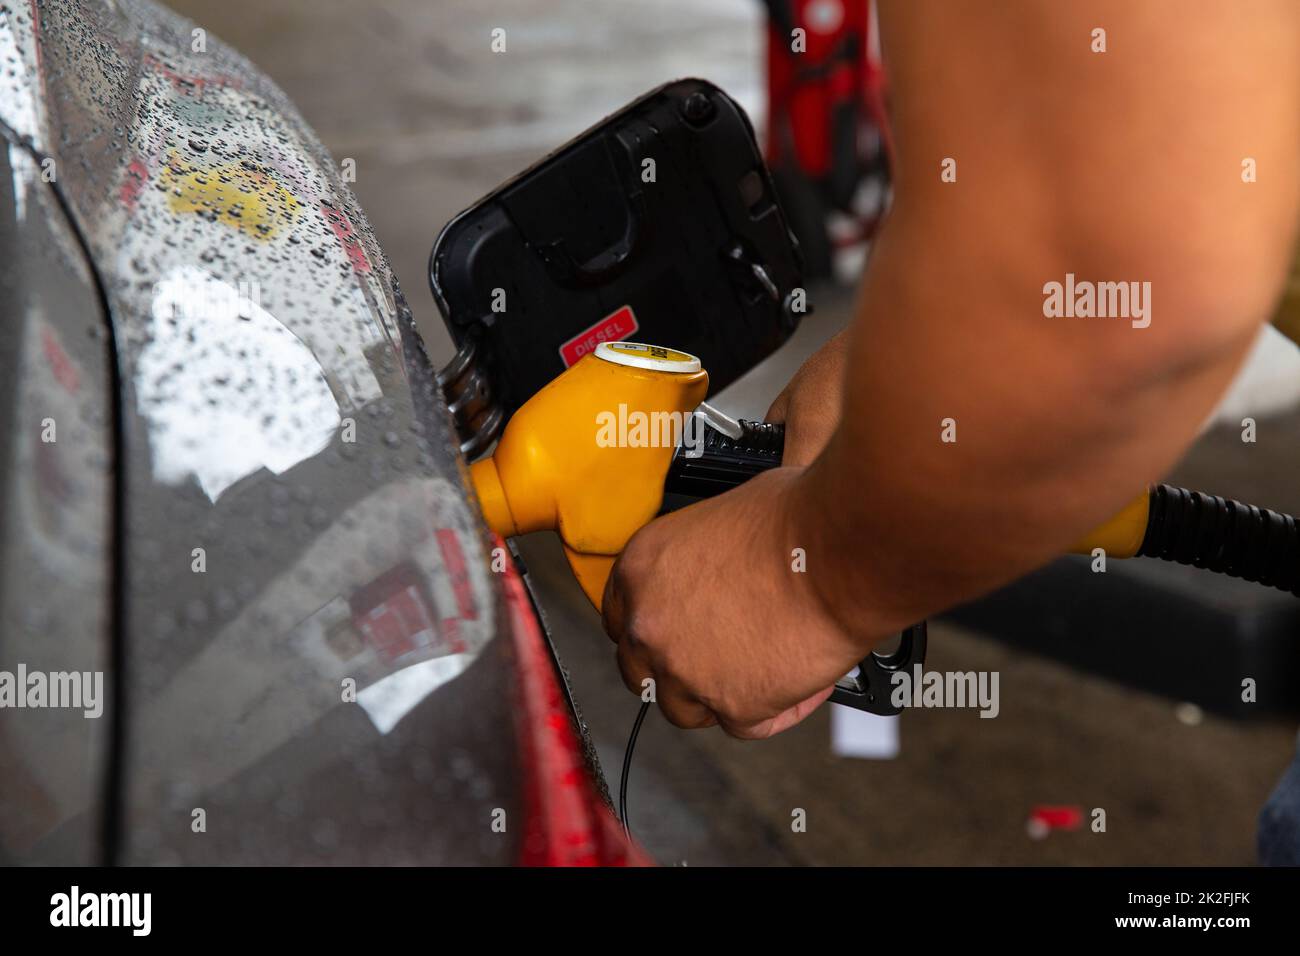 Man filling gasoline fuel in car holding pump. Stock Photo